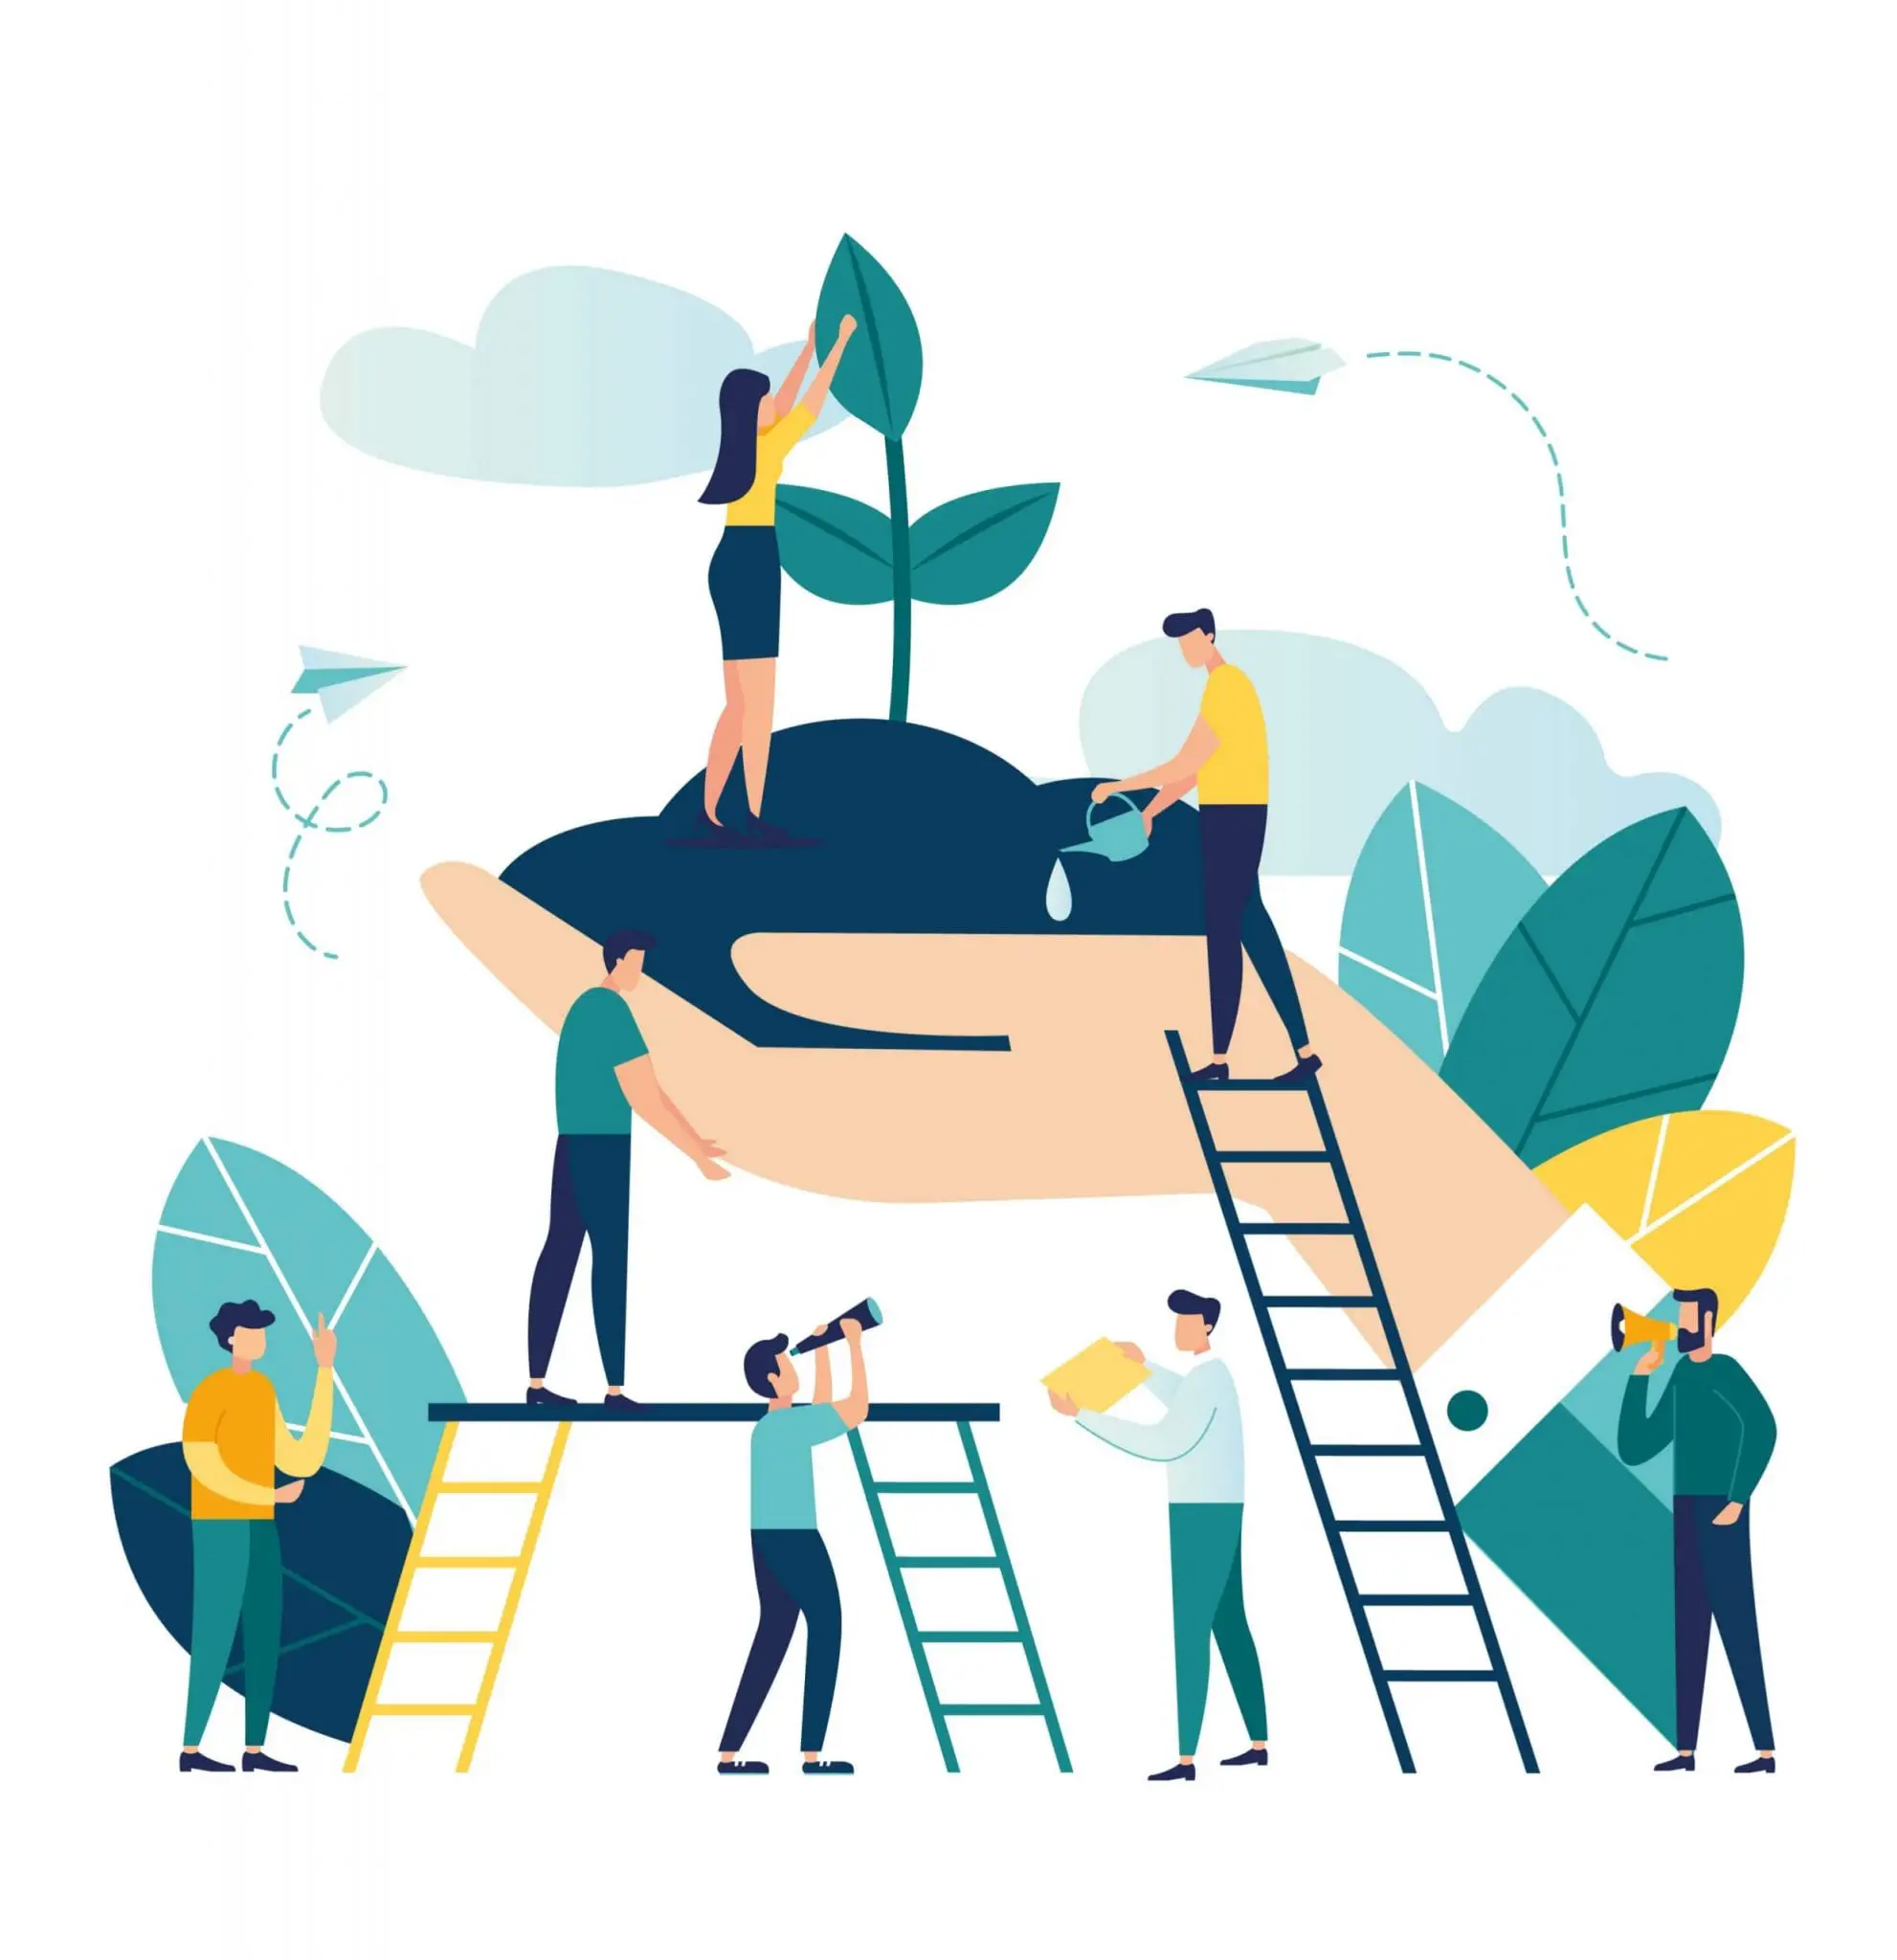 Vector Flat Illustration, Small People Prepare for the Holiday, Save the Planet From Pollution, World Environment Day, Bio-Technology, in the Big Hand the Earth With a Plant.